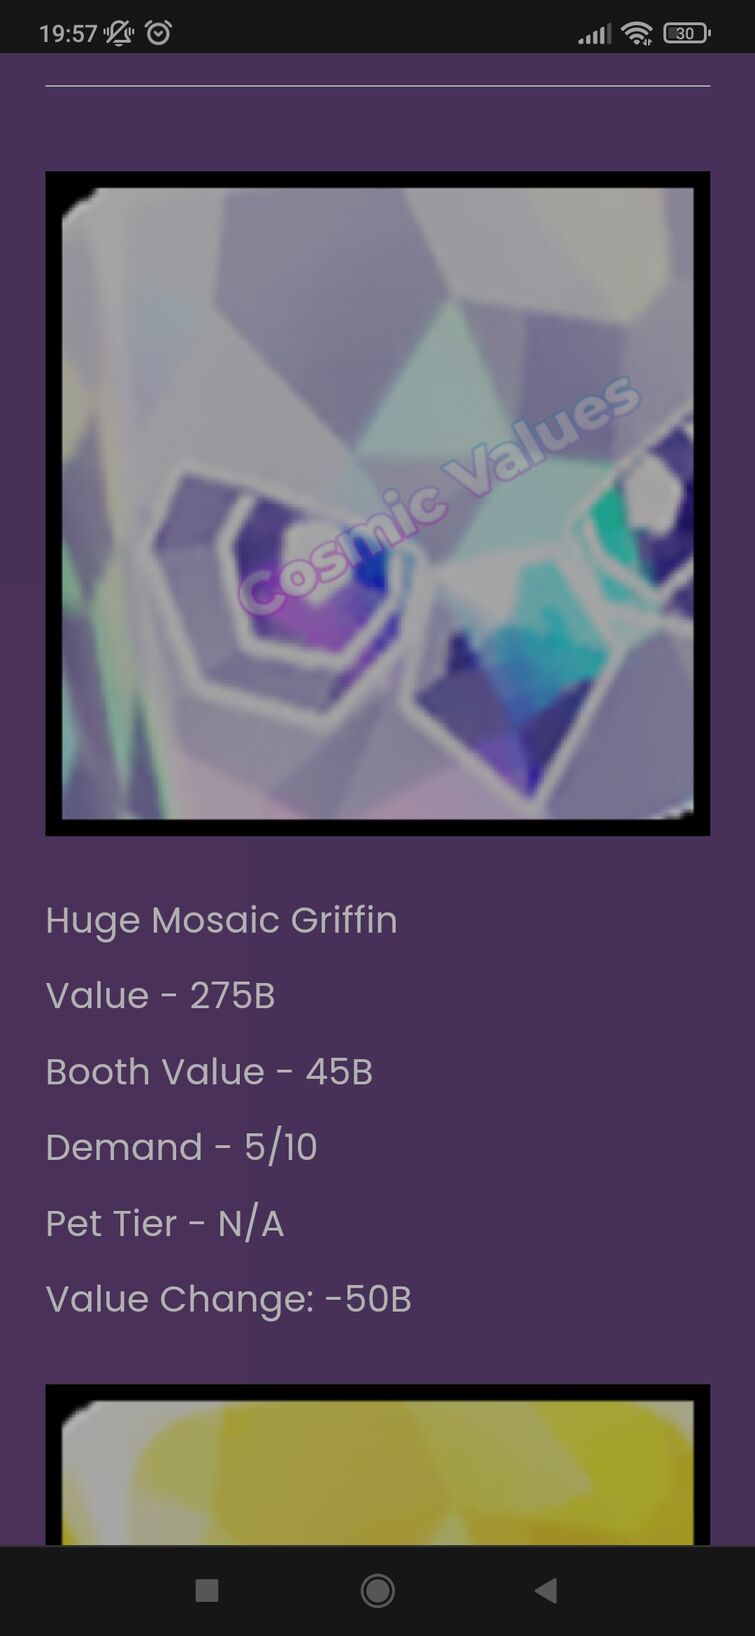 How Much Is The Huge Mosaic Griffin Worth in Pet Simulator 99